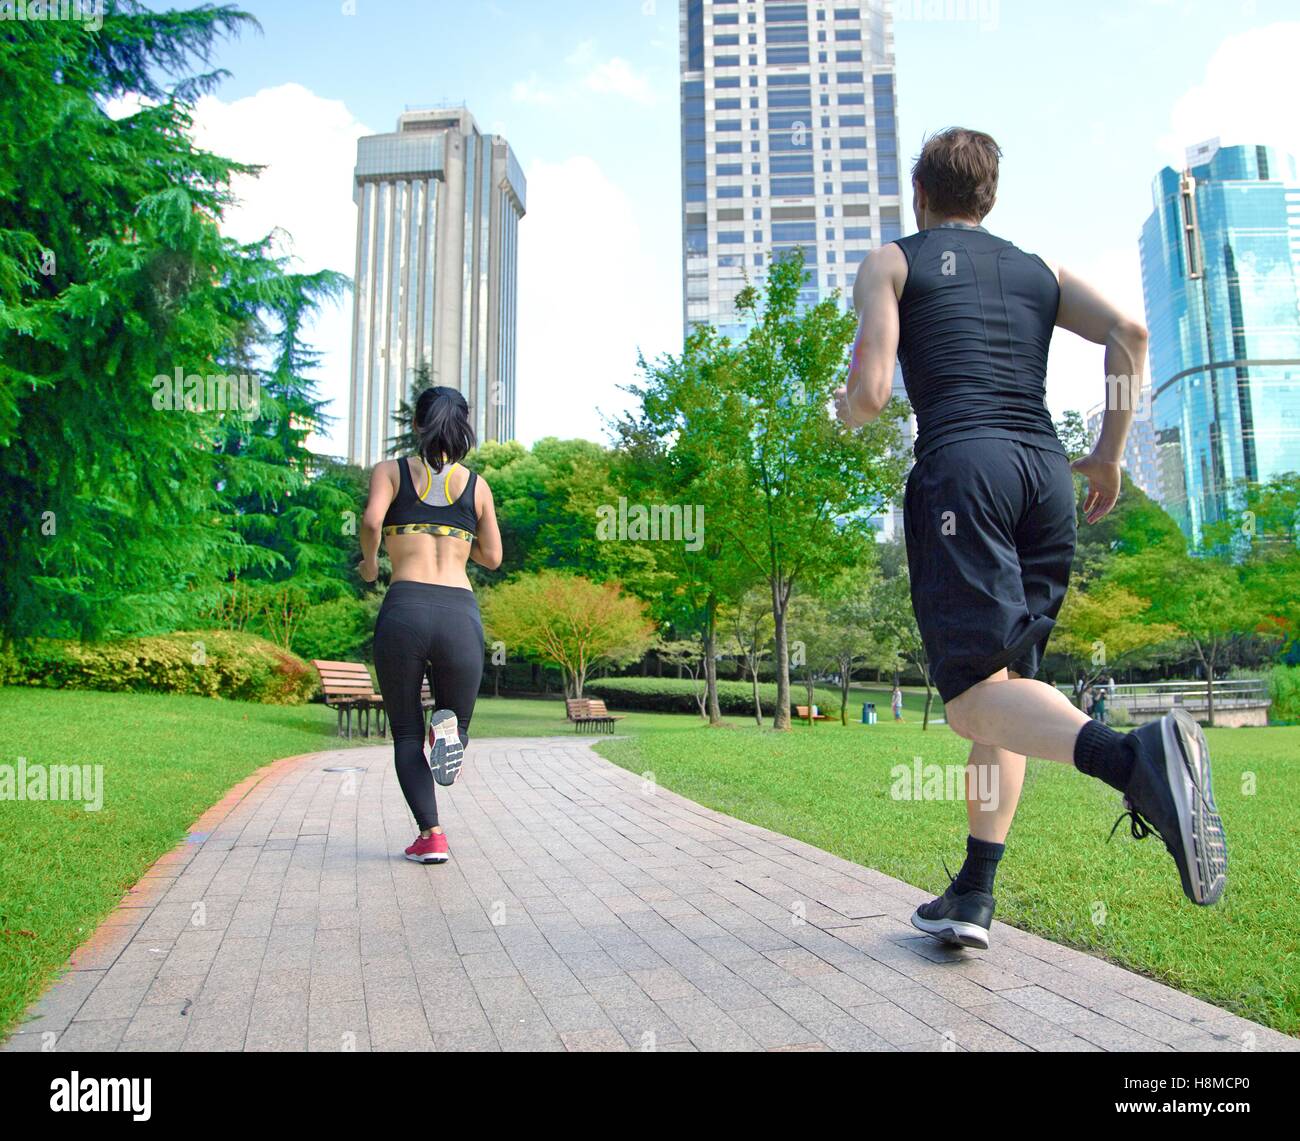 Healthy sports people trail running living an active life. Stock Photo